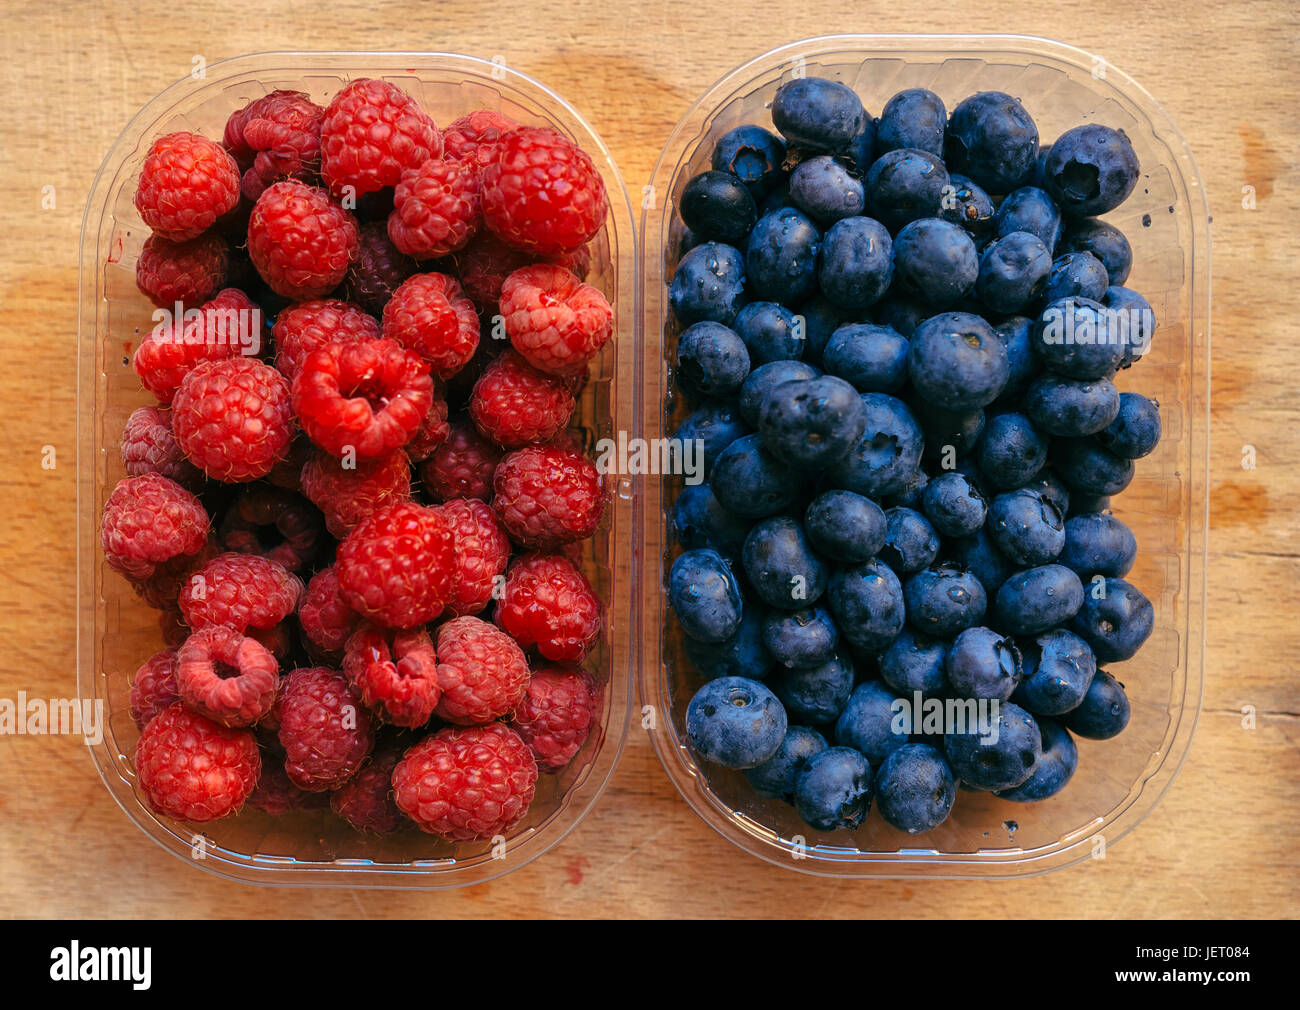 Blueberries and raspberries, healthy forest berry fruit, top view Stock Photo